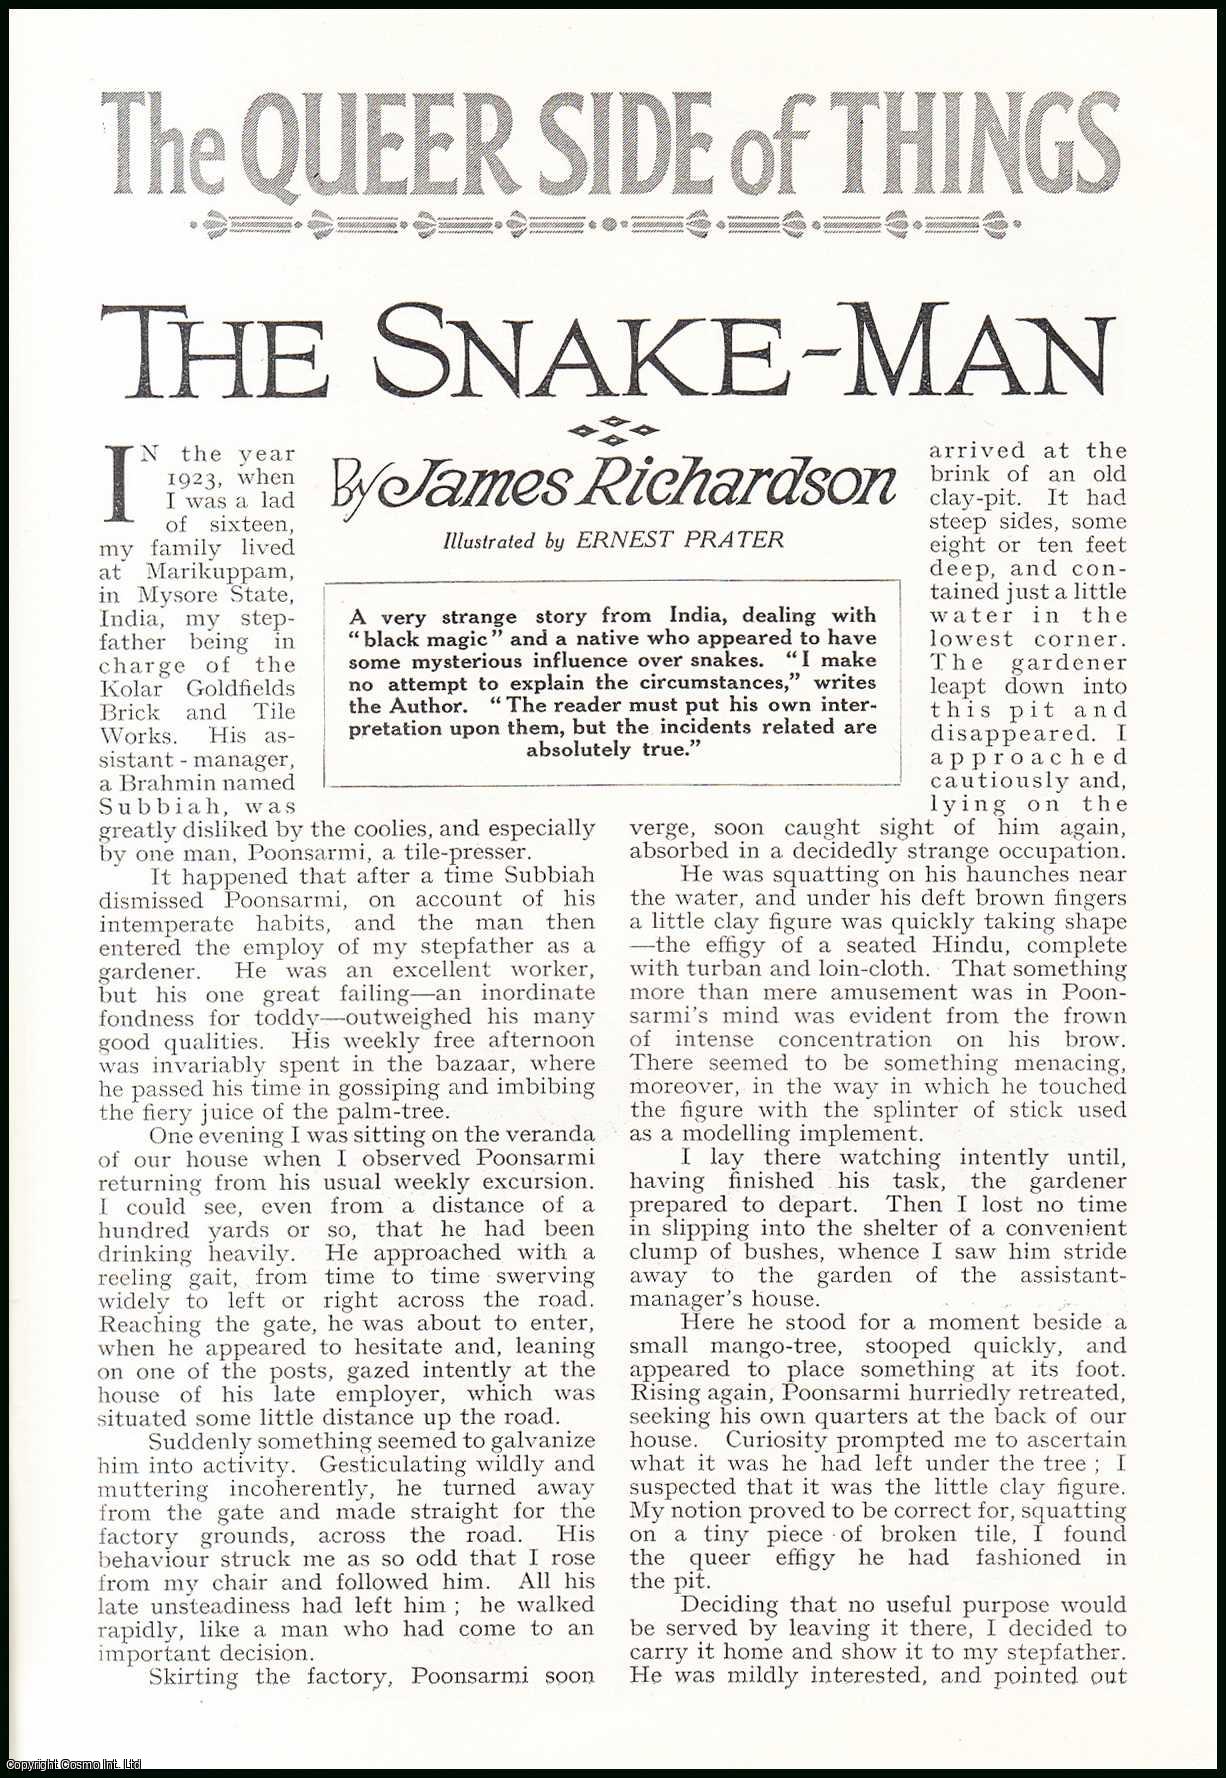 James Richardson. Illustrated by Ernest Prater. - The Snake-Man : a story from India, dealing with black magic. An uncommon original article from the Wide World Magazine, 1932.